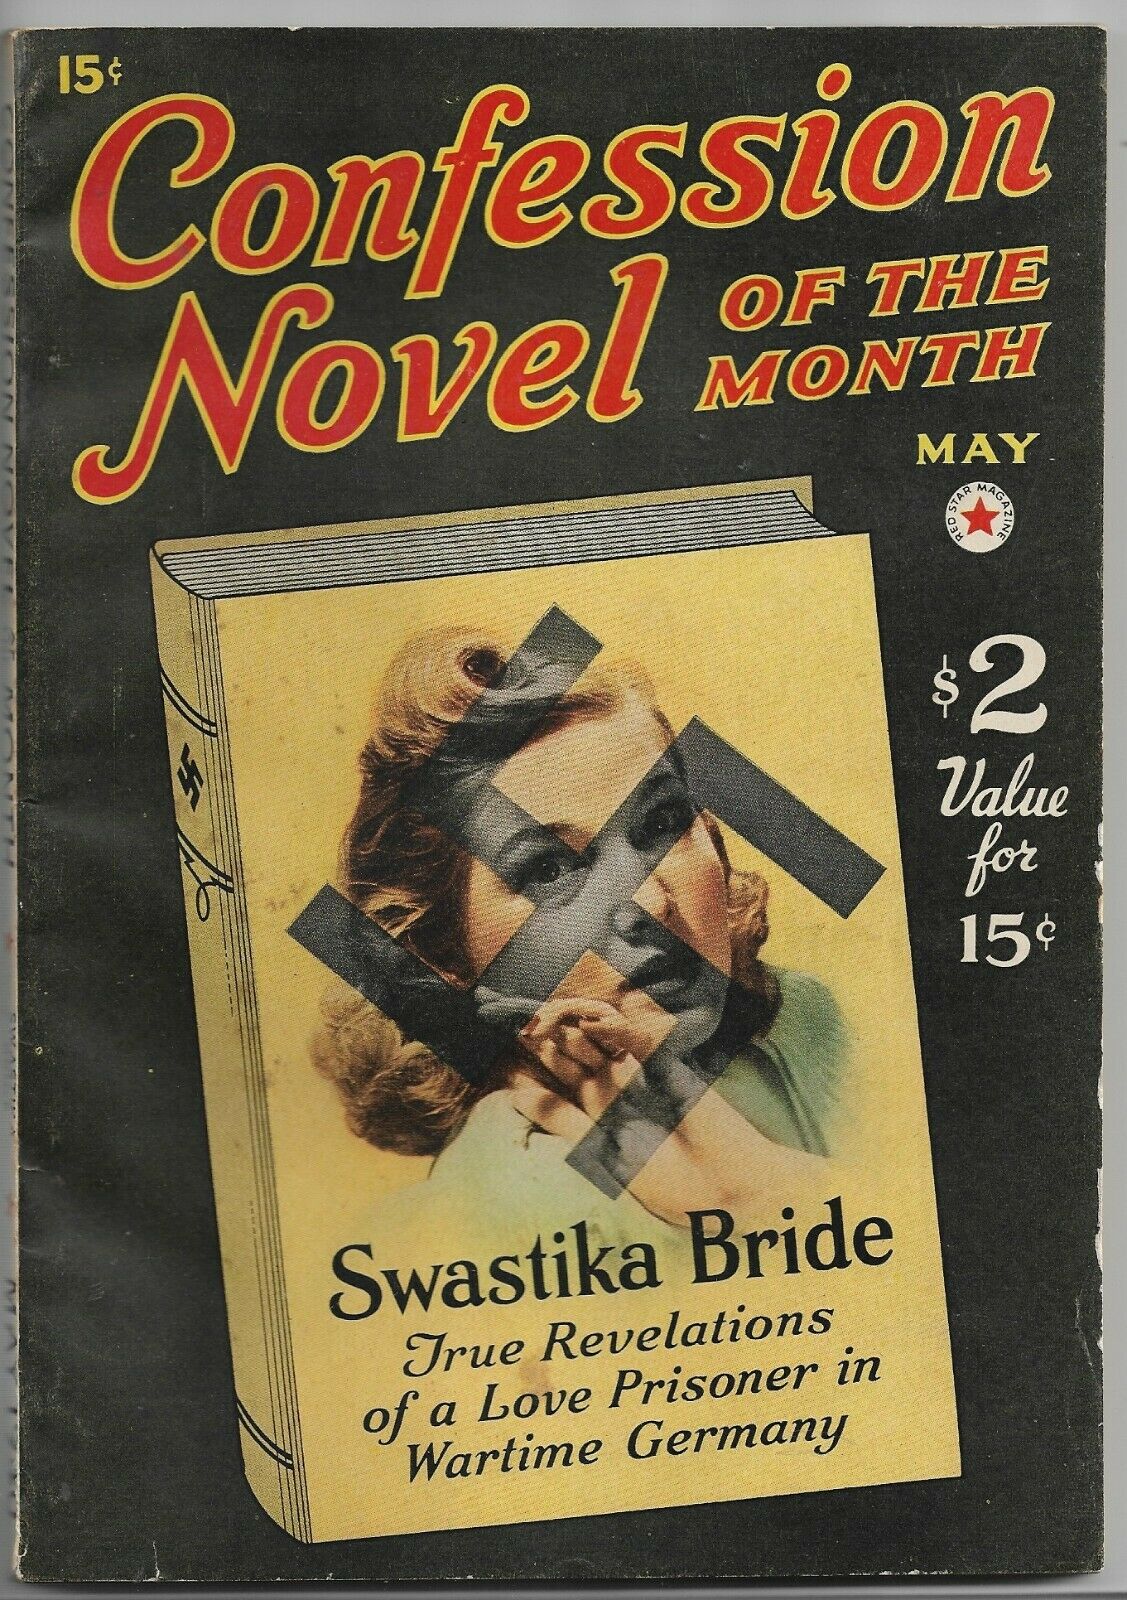 Confession Novel of the Month - May 1940